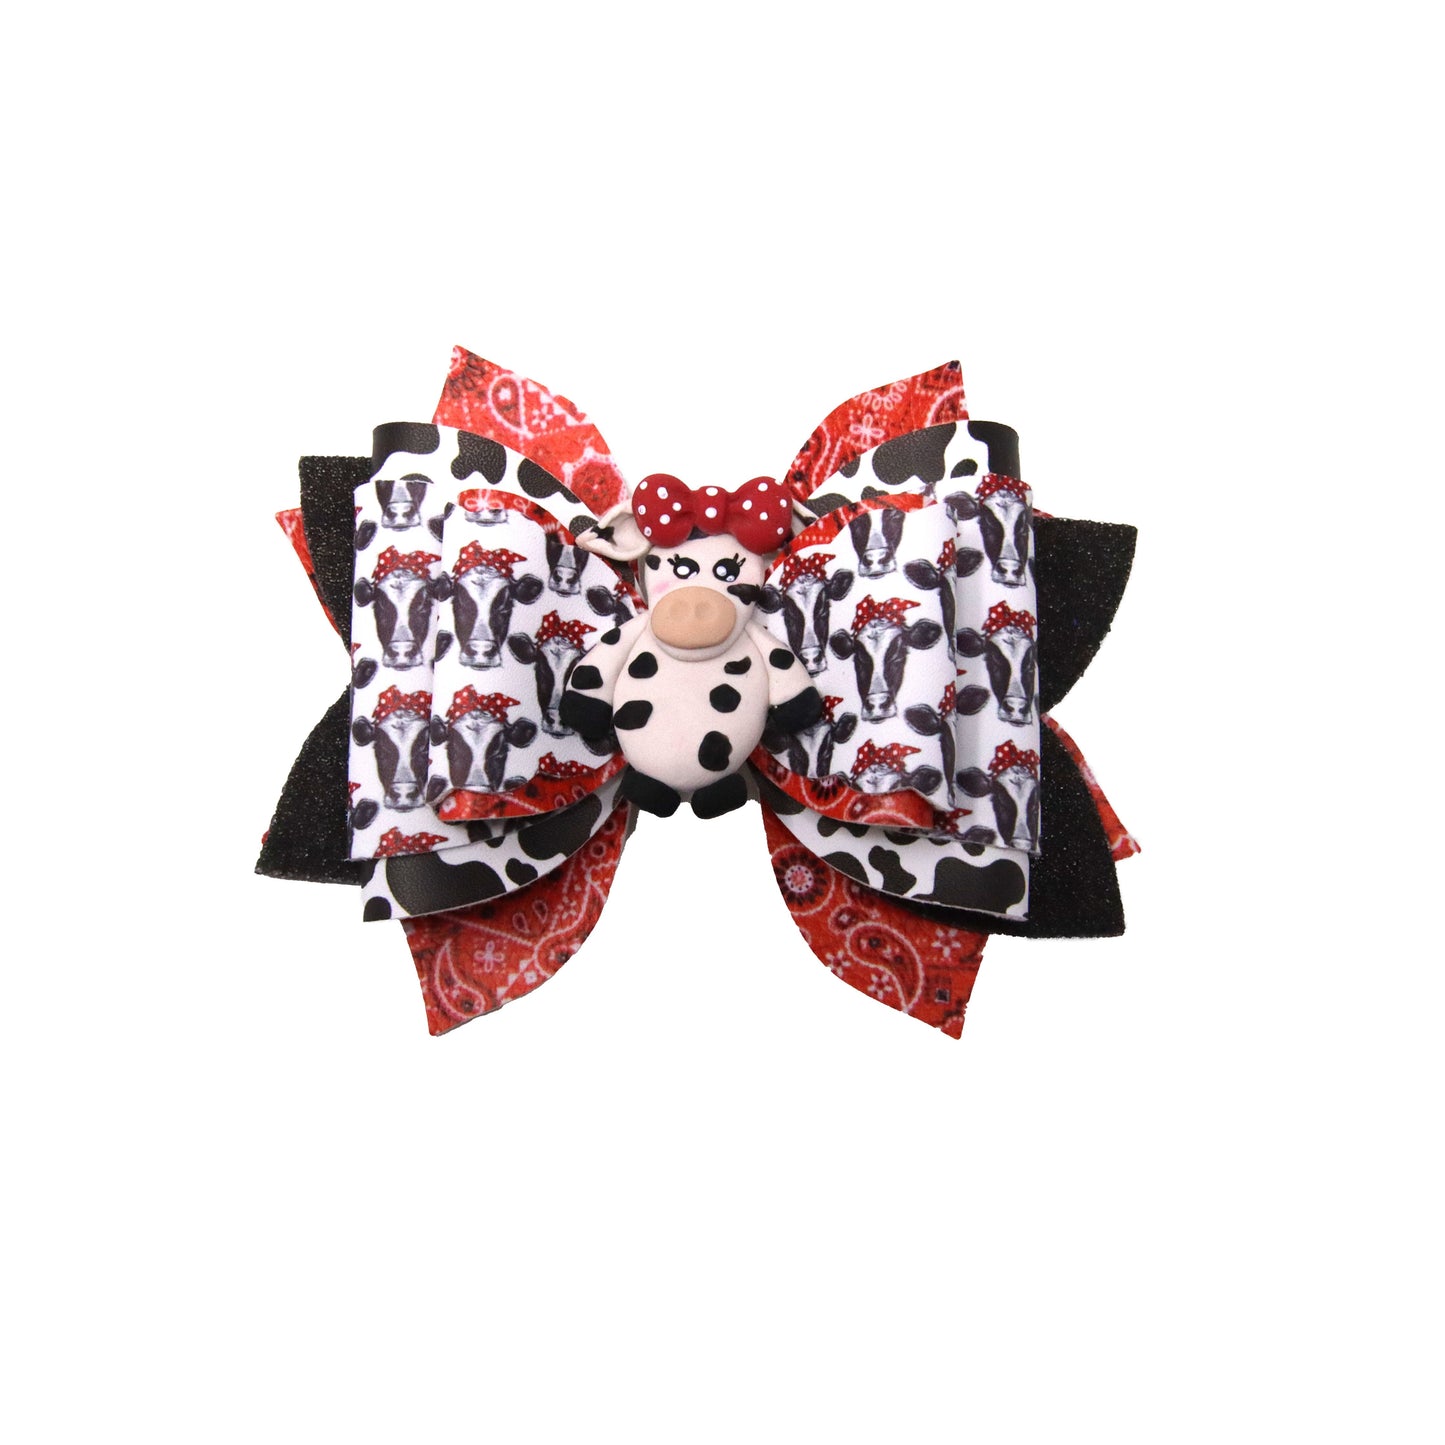 Bessie Dressed-up Double Diva Bow 5" with Bessie Clay